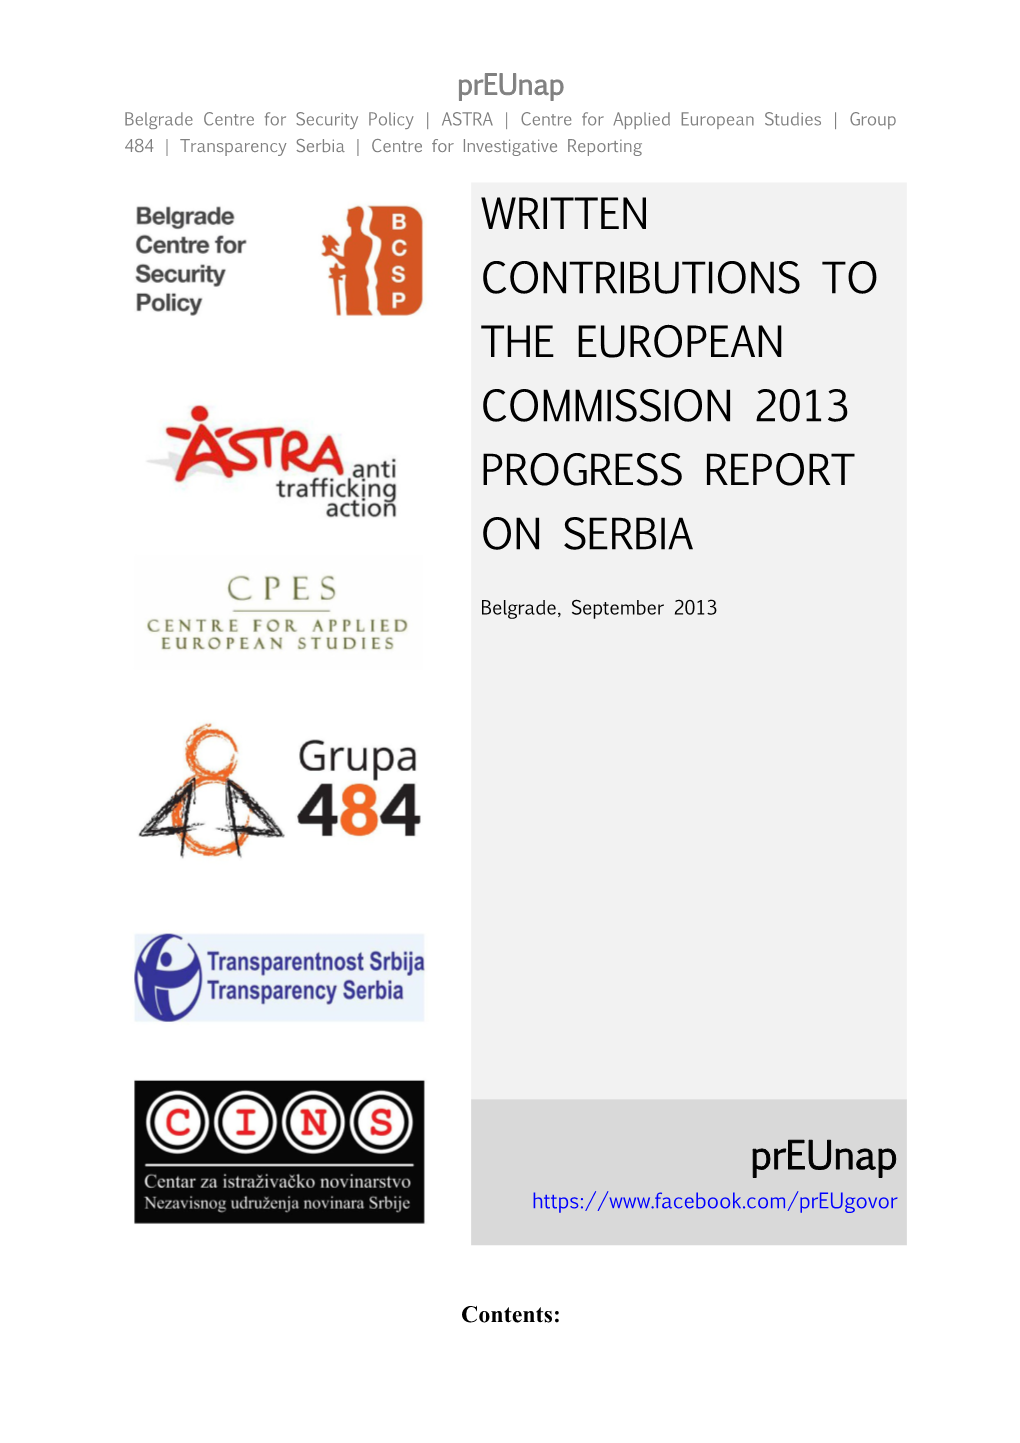 Implementation of the European Commission Recommendations from 2012 Progress Report 11